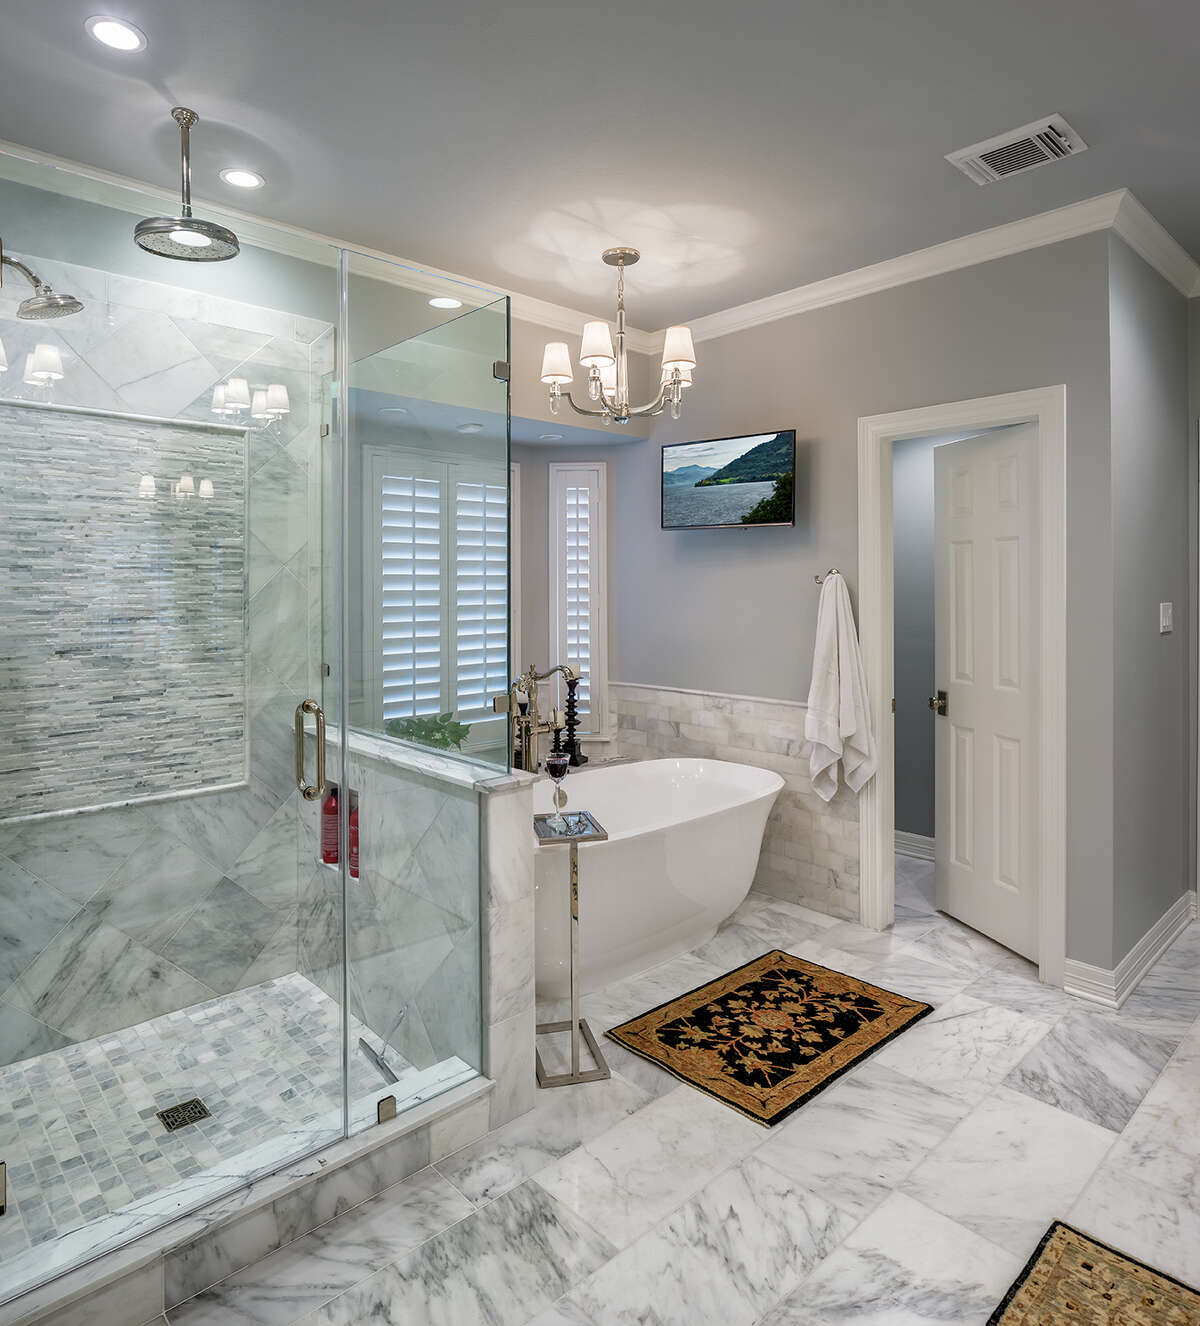 In the master bathroom, the old garden tub was removed to make room for a sleeker freestanding bathtub.